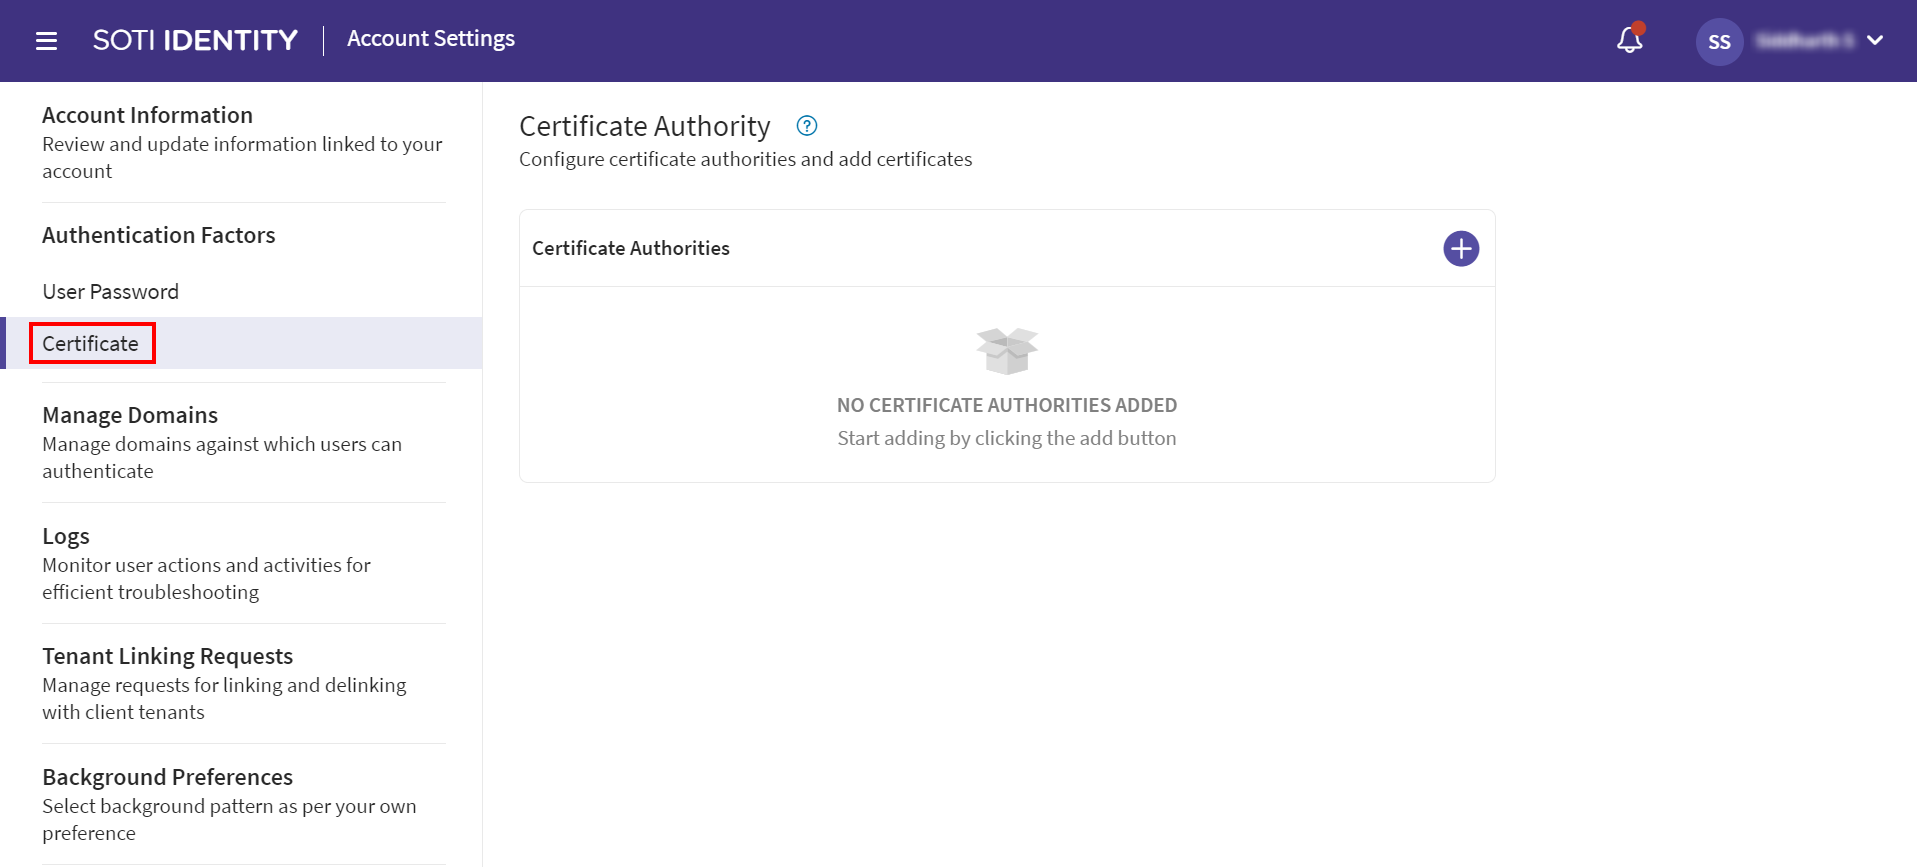 Certificate Authority console view